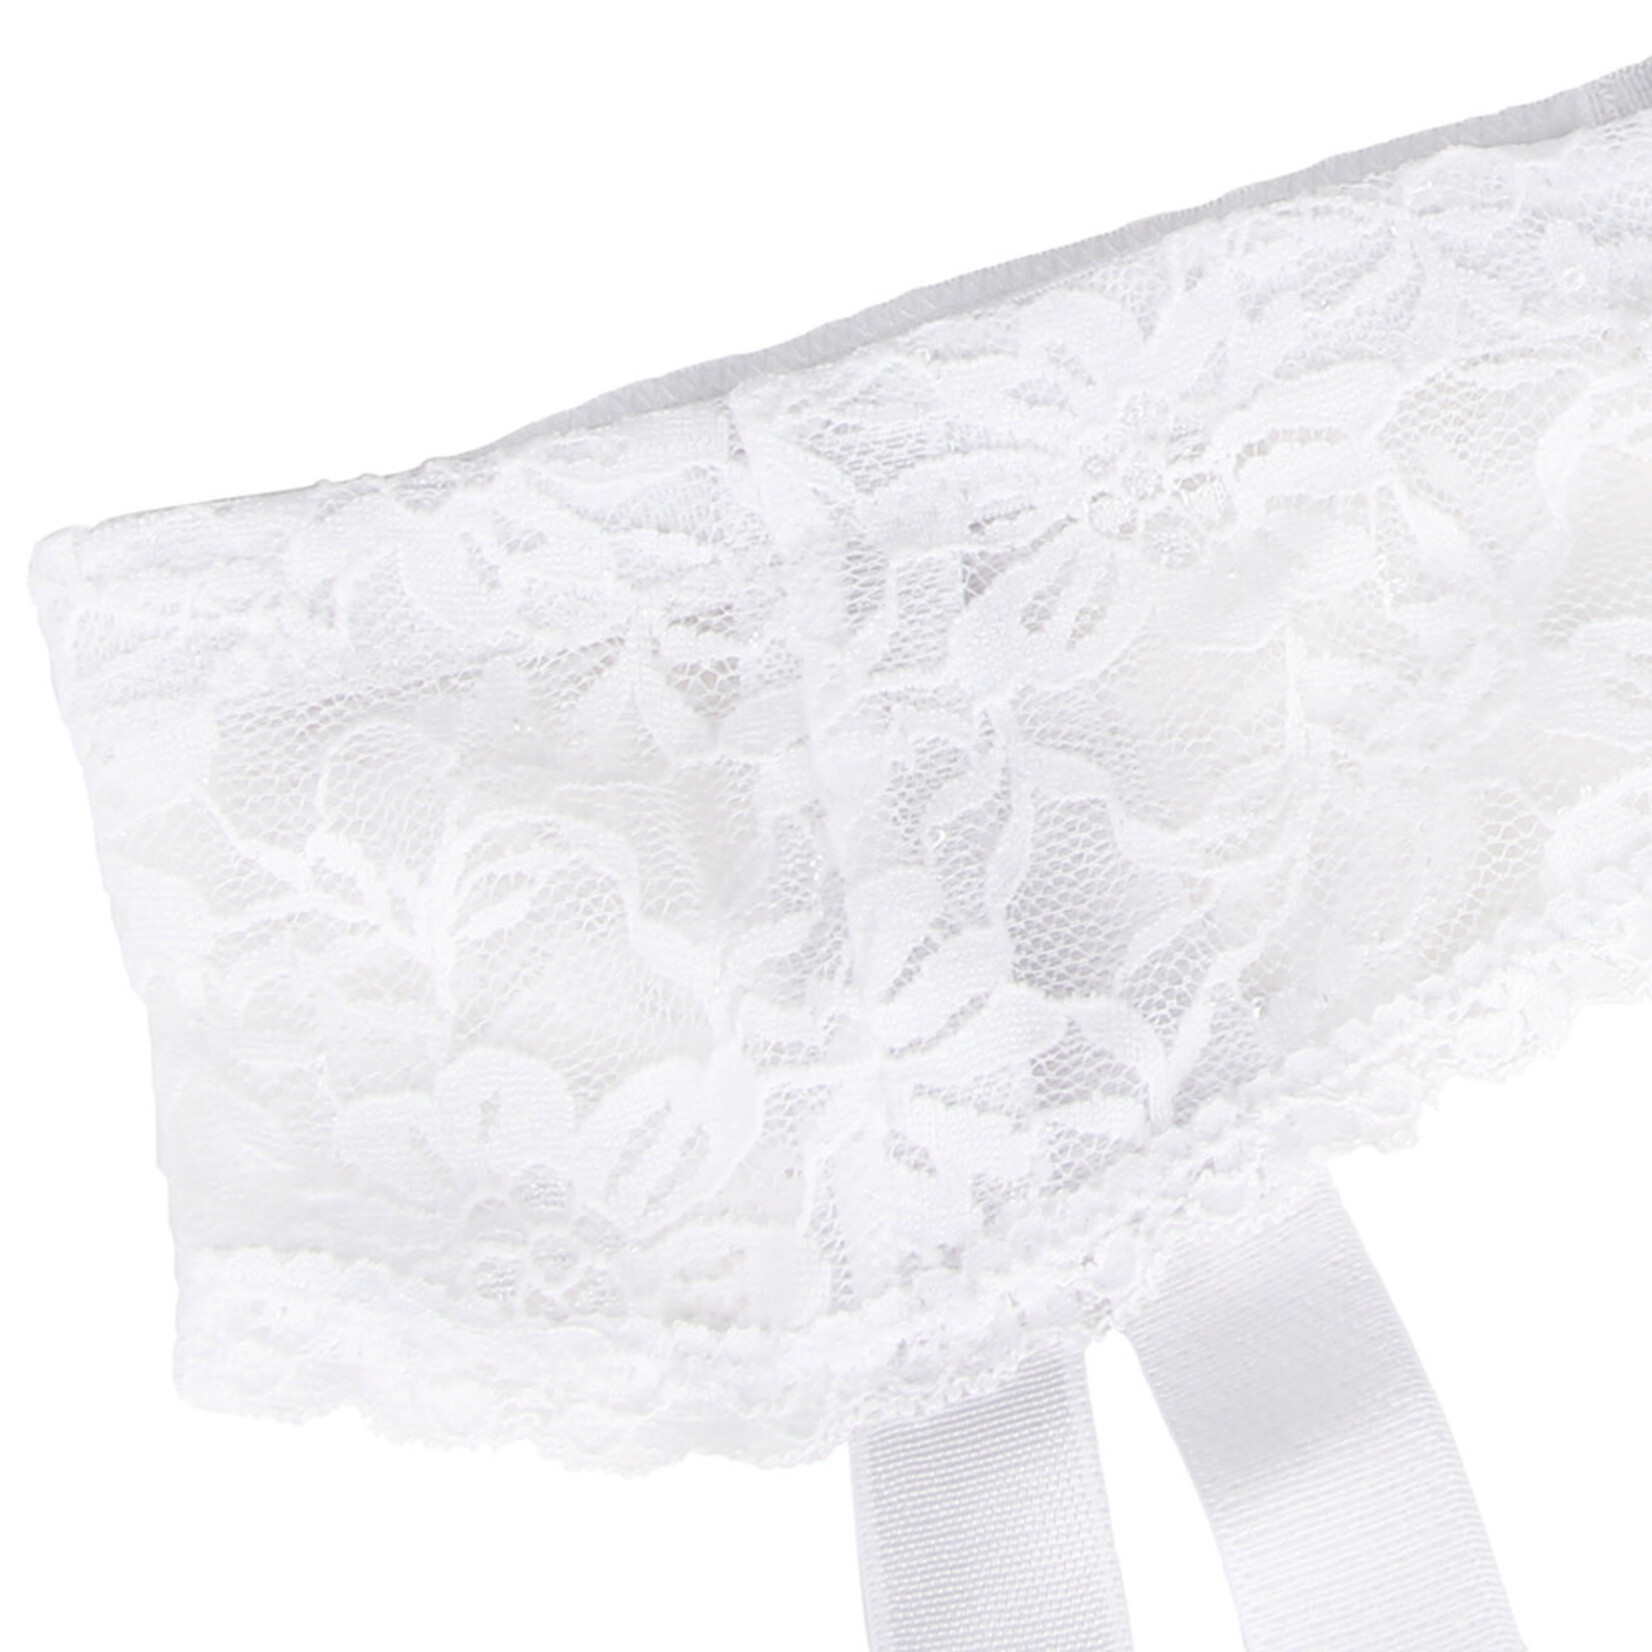 OH YEAH! -  WHITE LACE METAL BUTTON G STRING PANTIES WITH GARTER BELT M-L